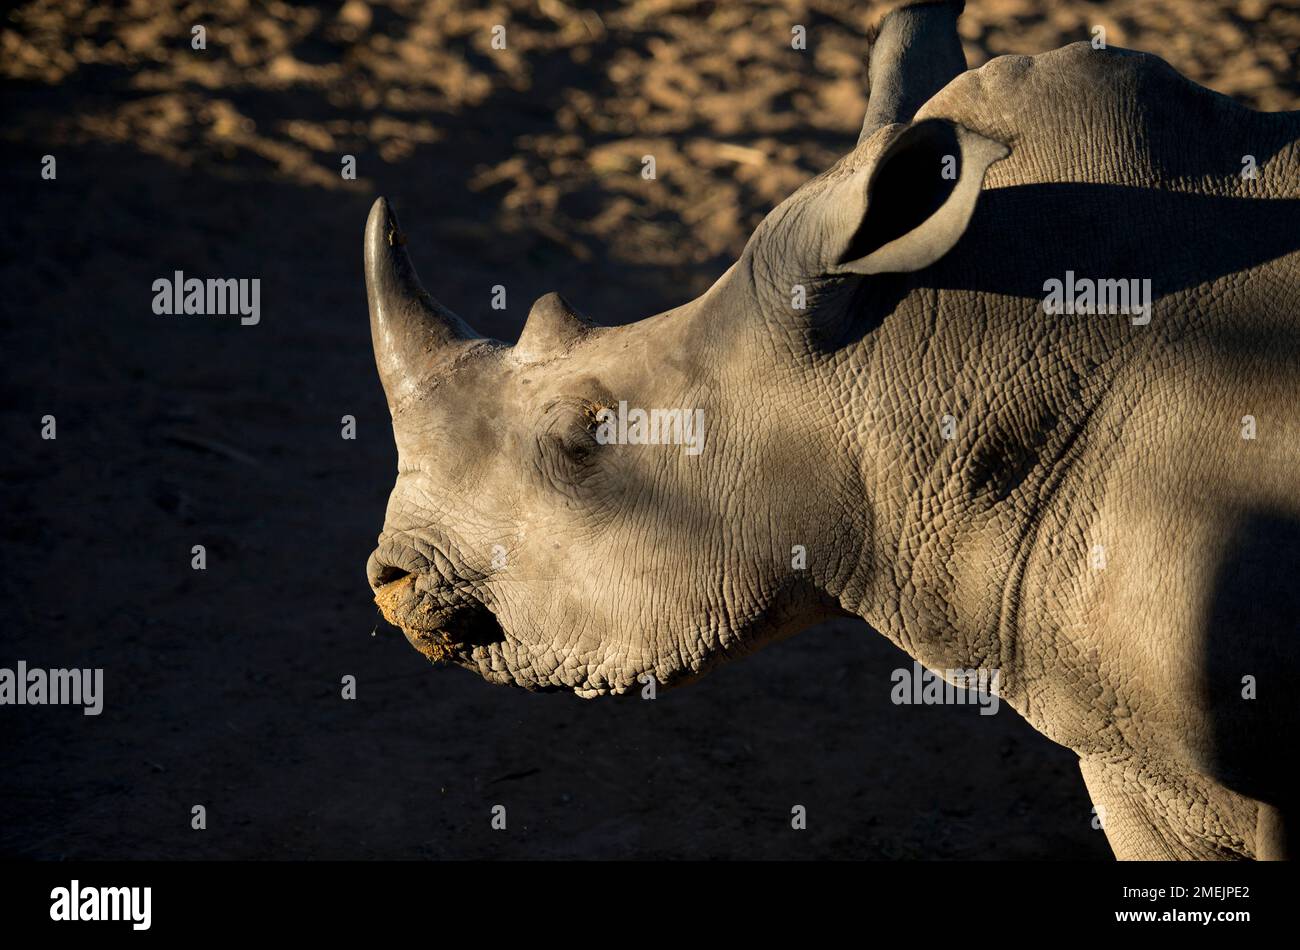 White Rhinocerous (Ceratotherium simum), Ant's Nest Reserve, near Vaalwater, Limpopo province, South Africa Stock Photo